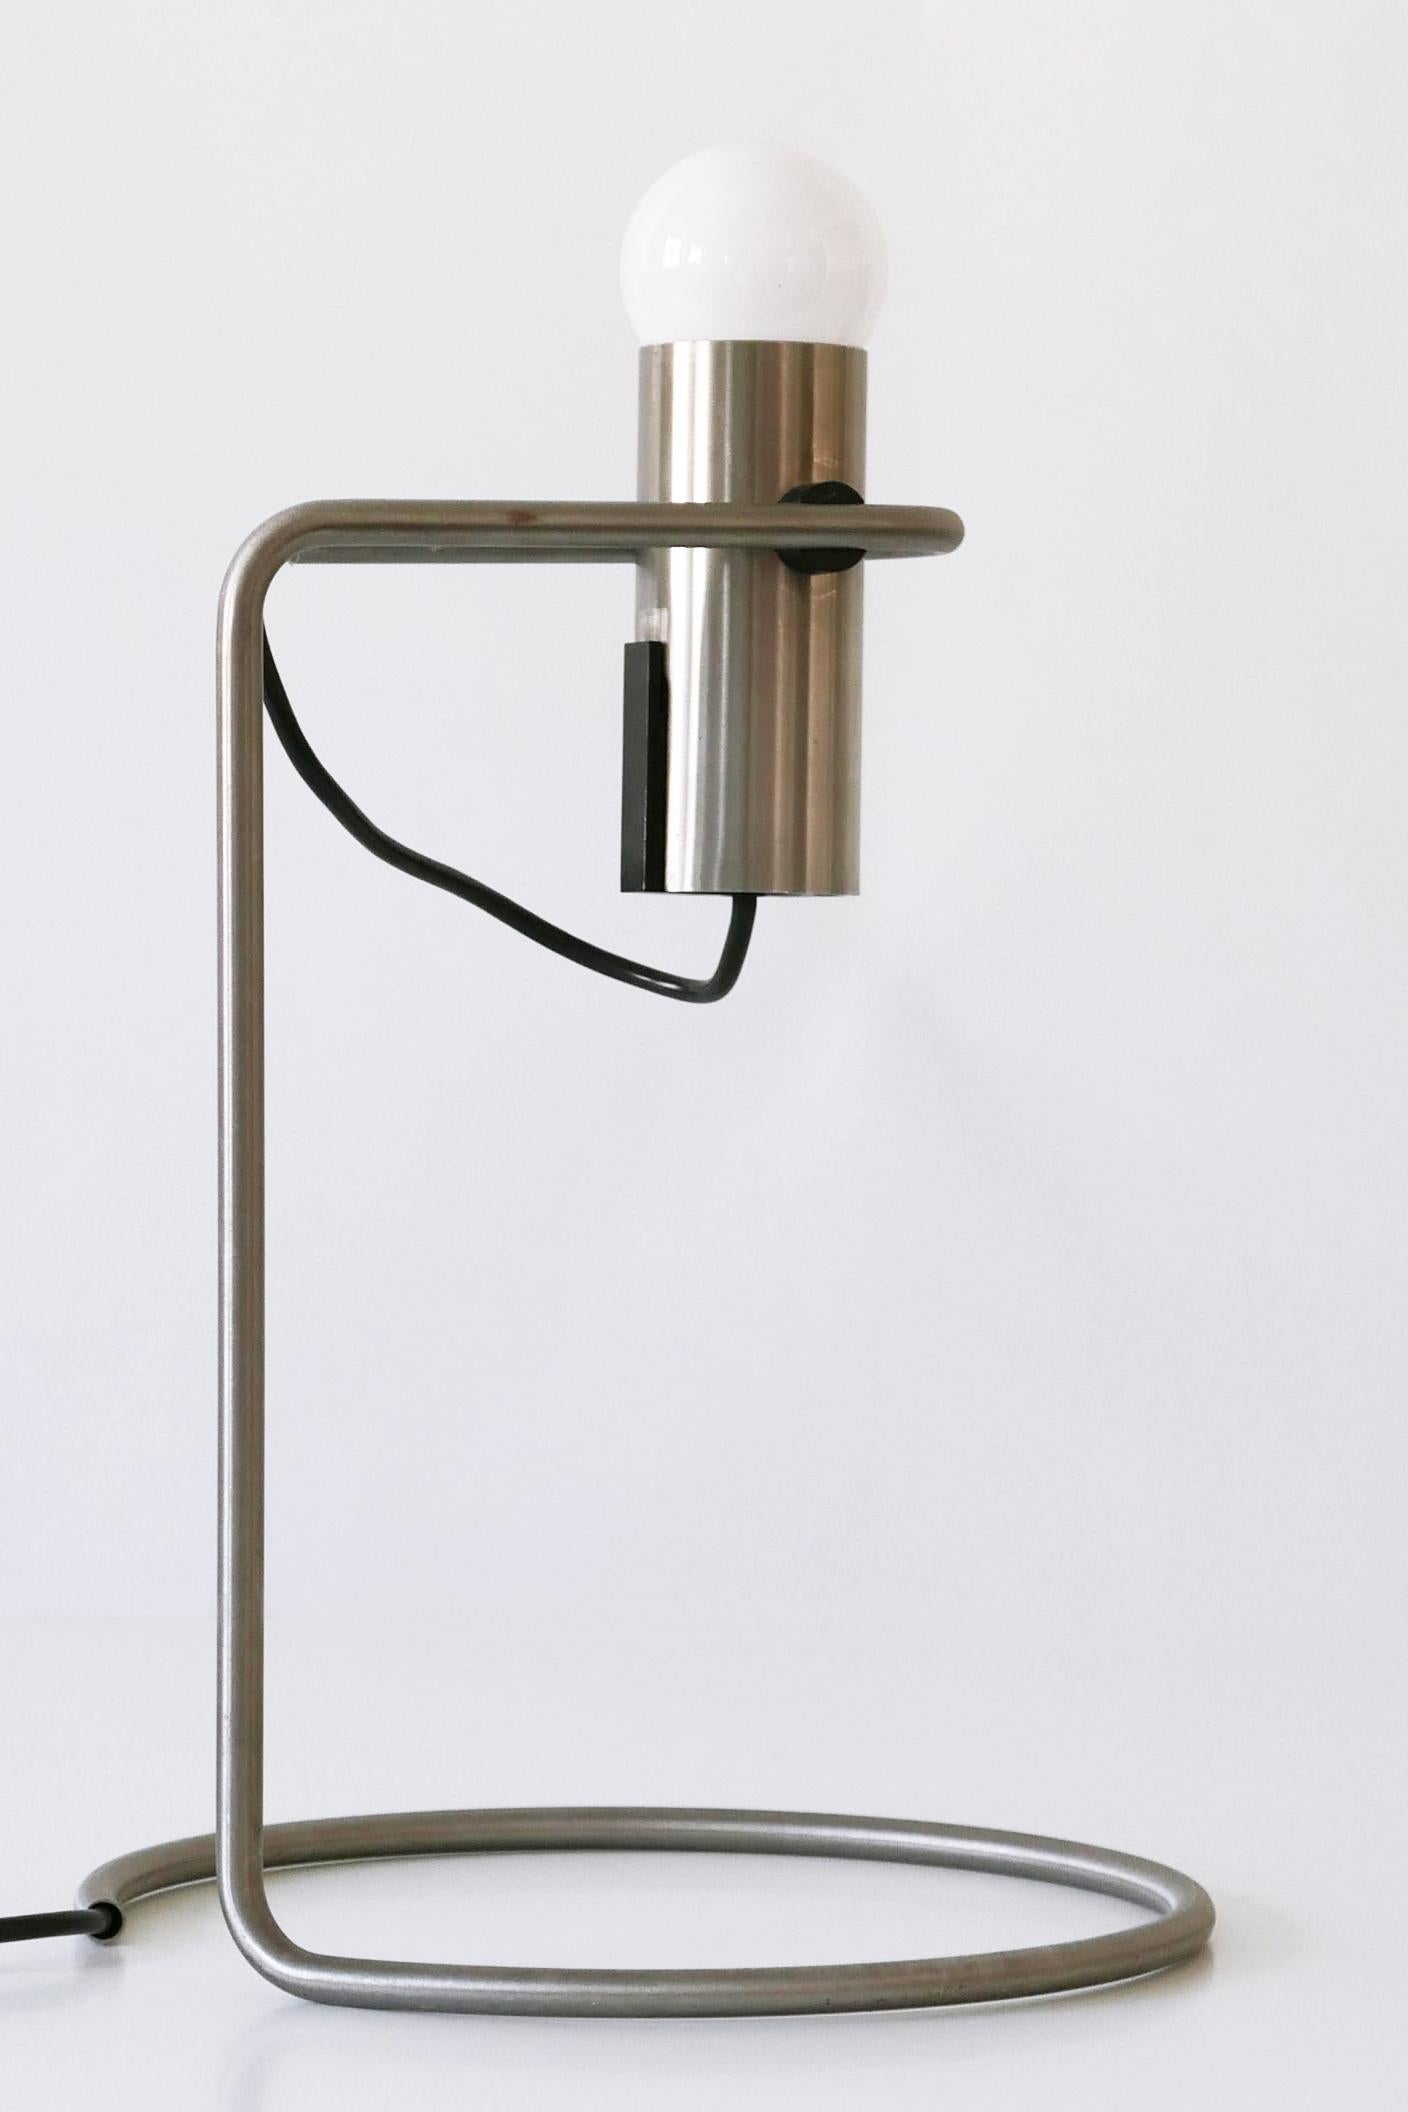 Exceptional Minimalistic Mid-Century Modern Table Lamp or Desk Light, 1960s For Sale 8